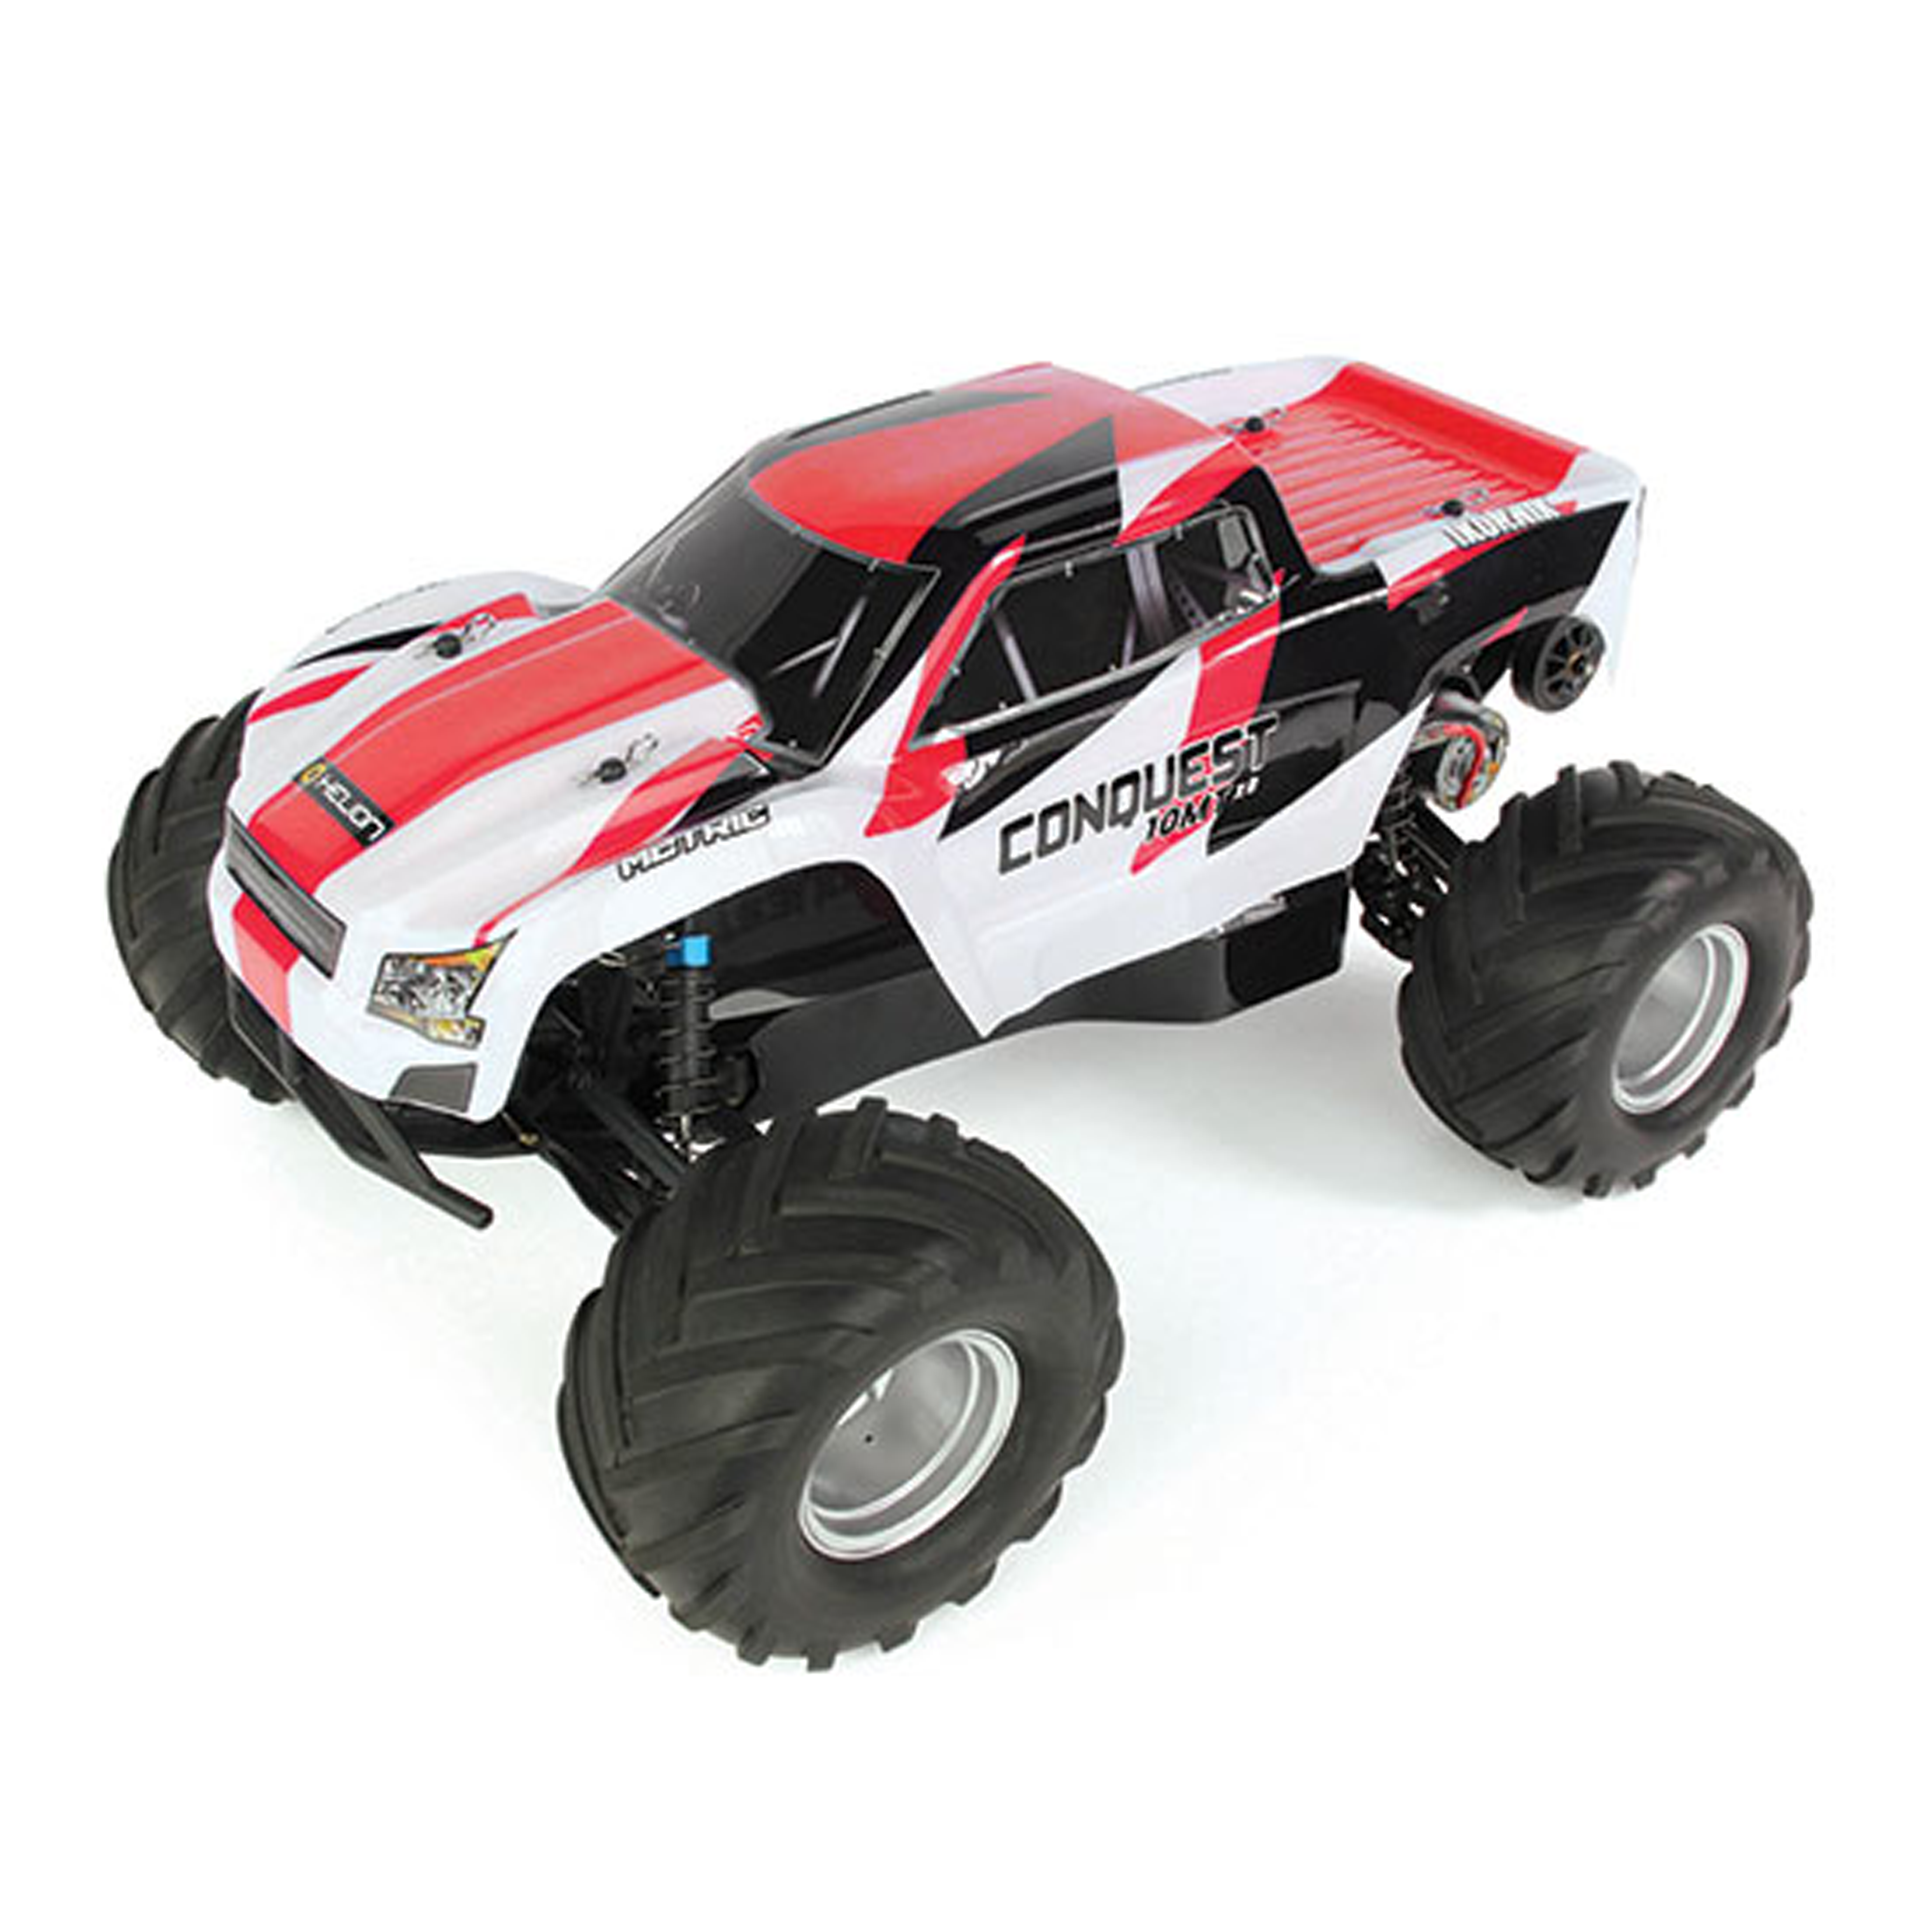 Image of Helion Conquest 10MT XB 1:10 Scale 2WD RC Truck